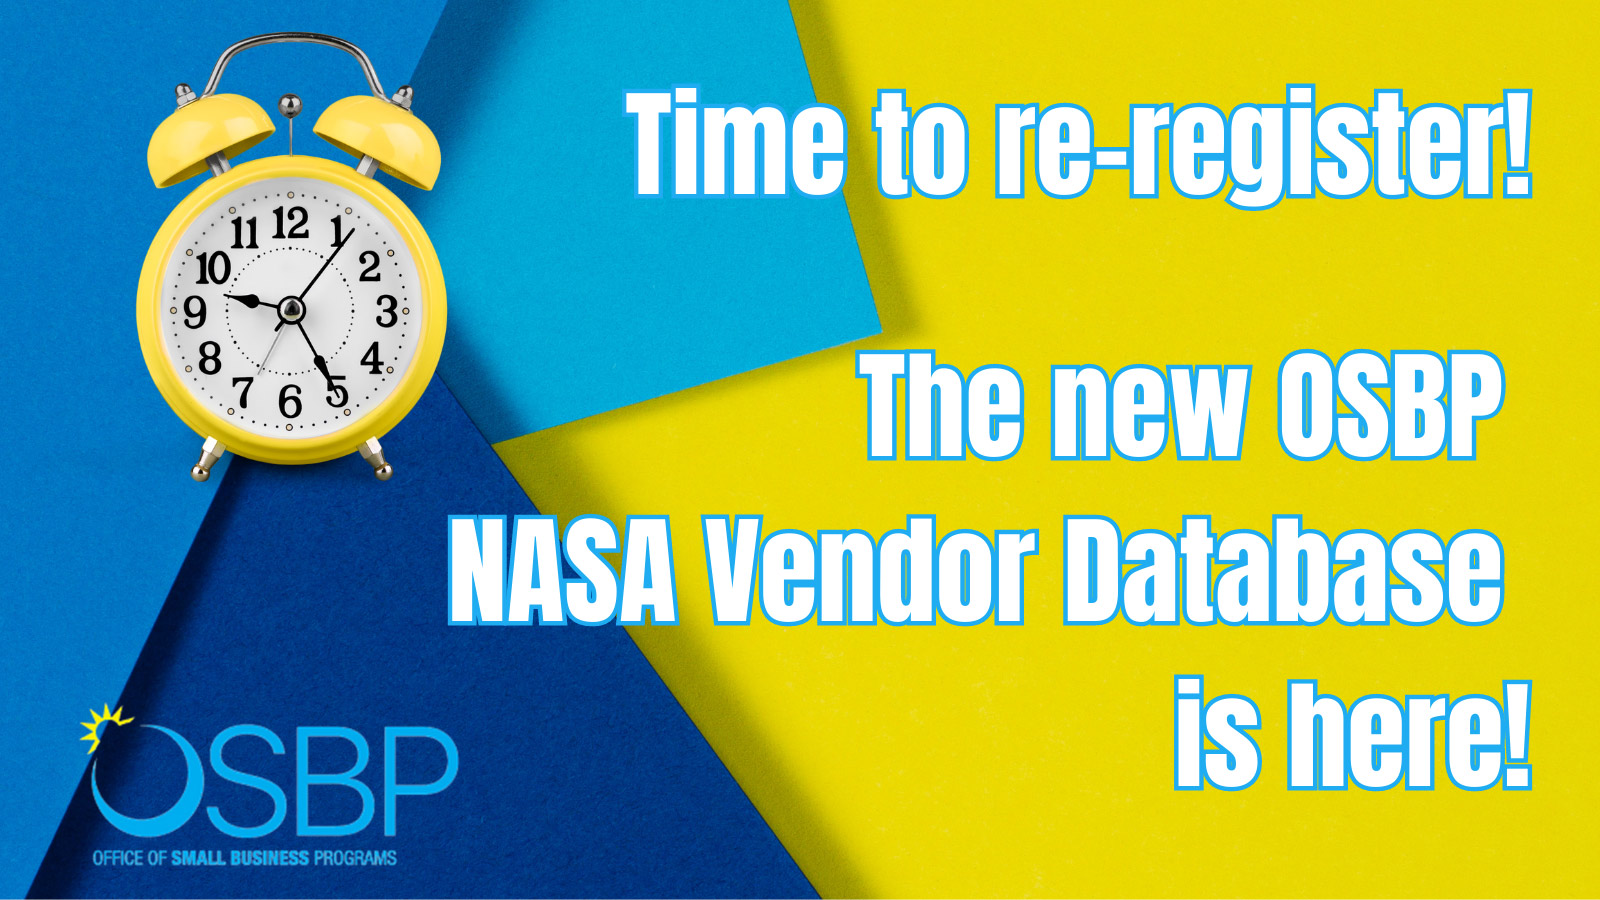 Graphic of clock and the message to re-register for NASA Vendor Datebase